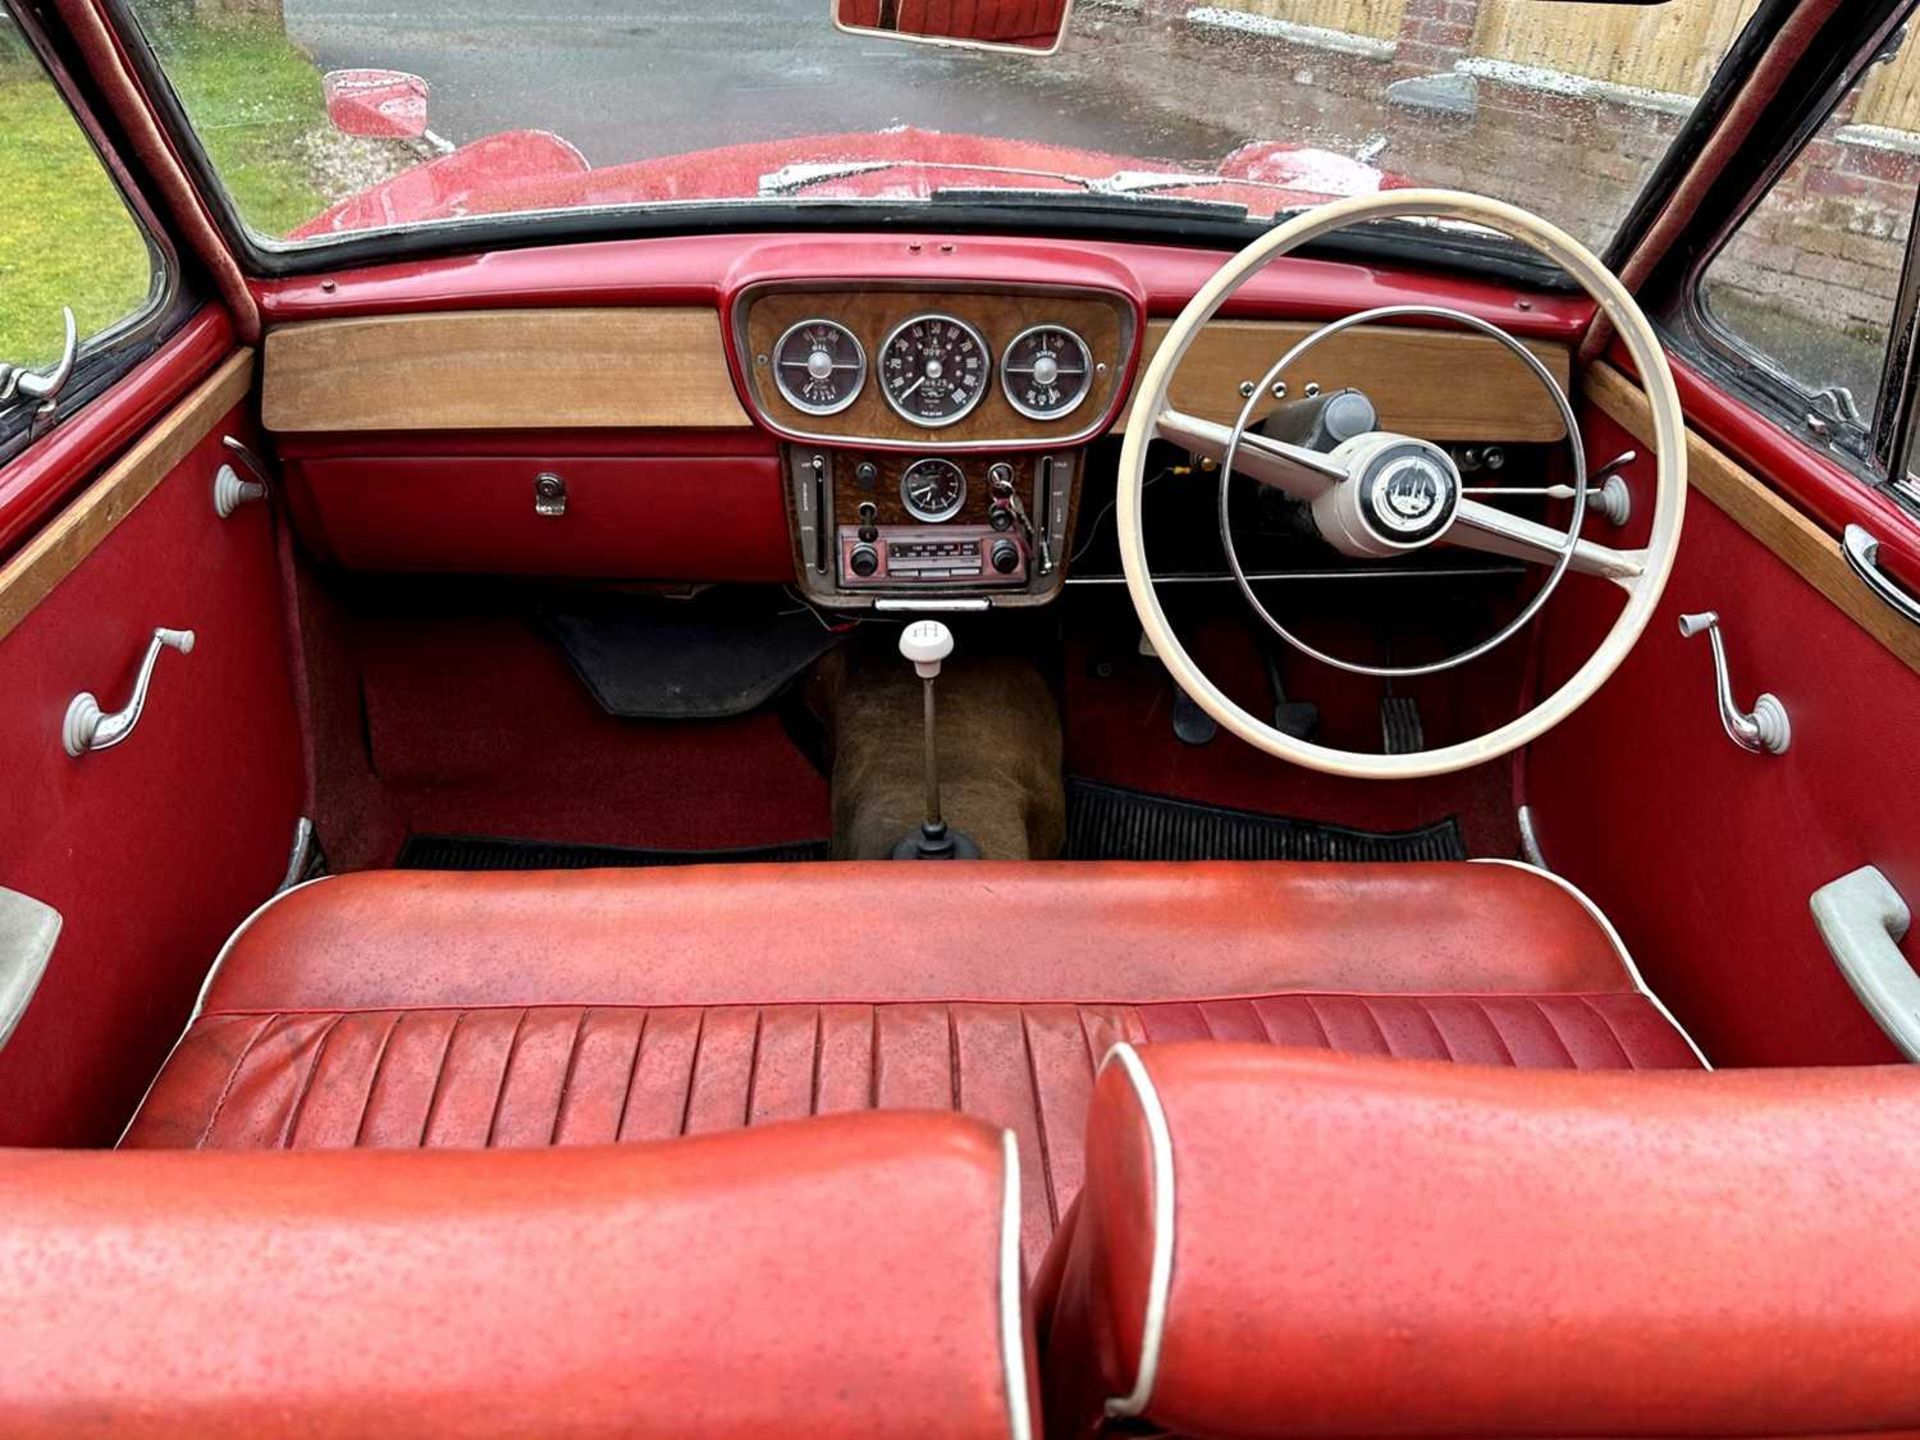 1961 Singer Gazelle Convertible Comes complete with overdrive, period radio and badge bar - Image 51 of 95